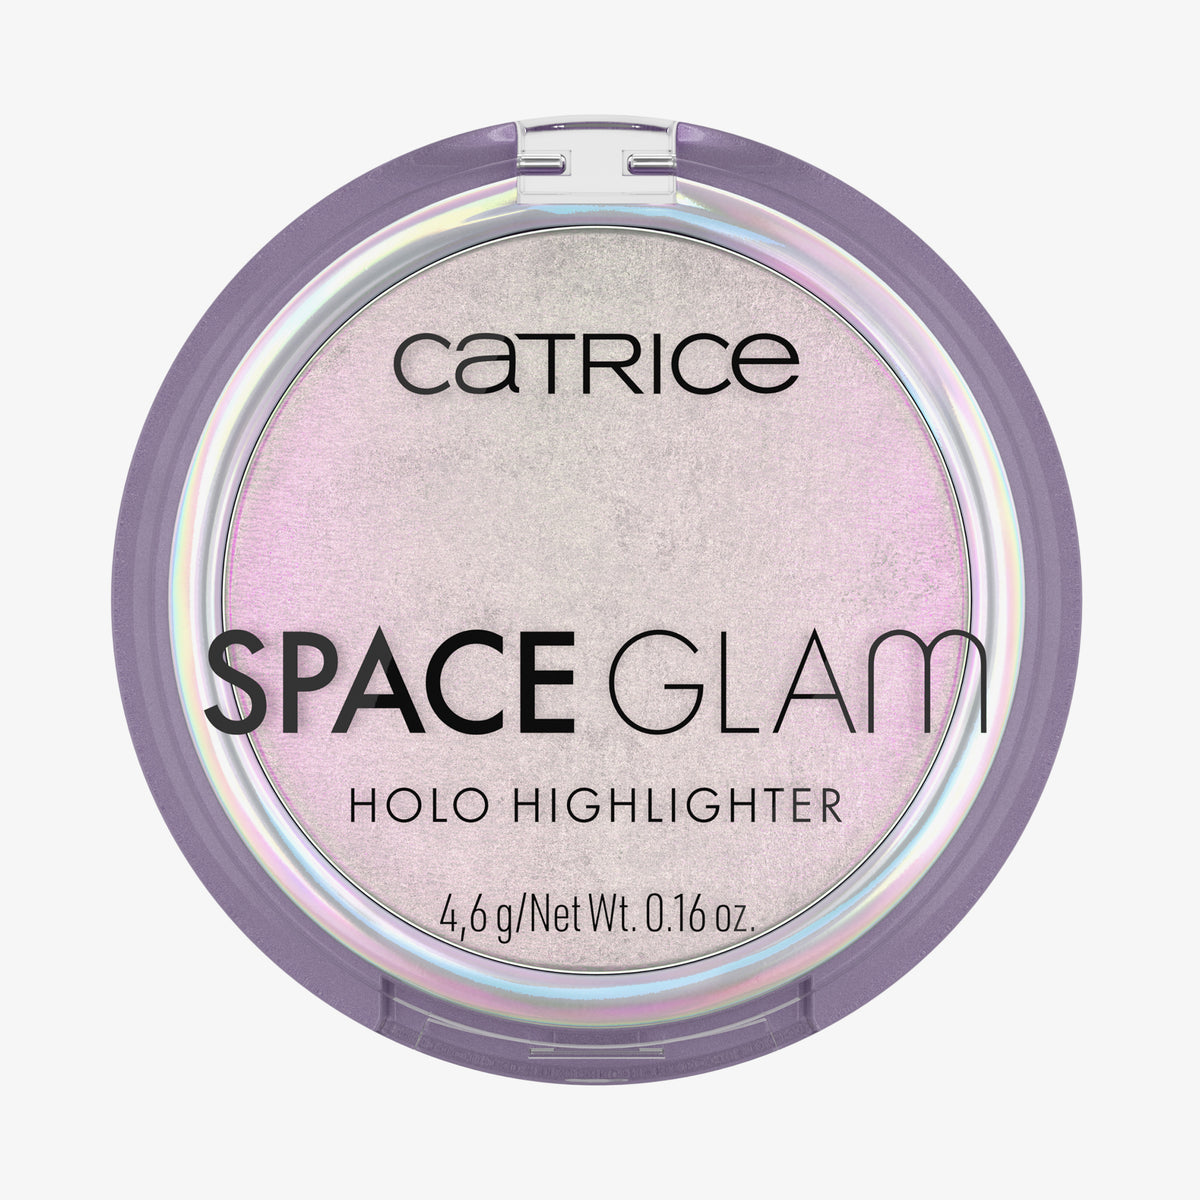 Space Glam Holo Highlighter 010